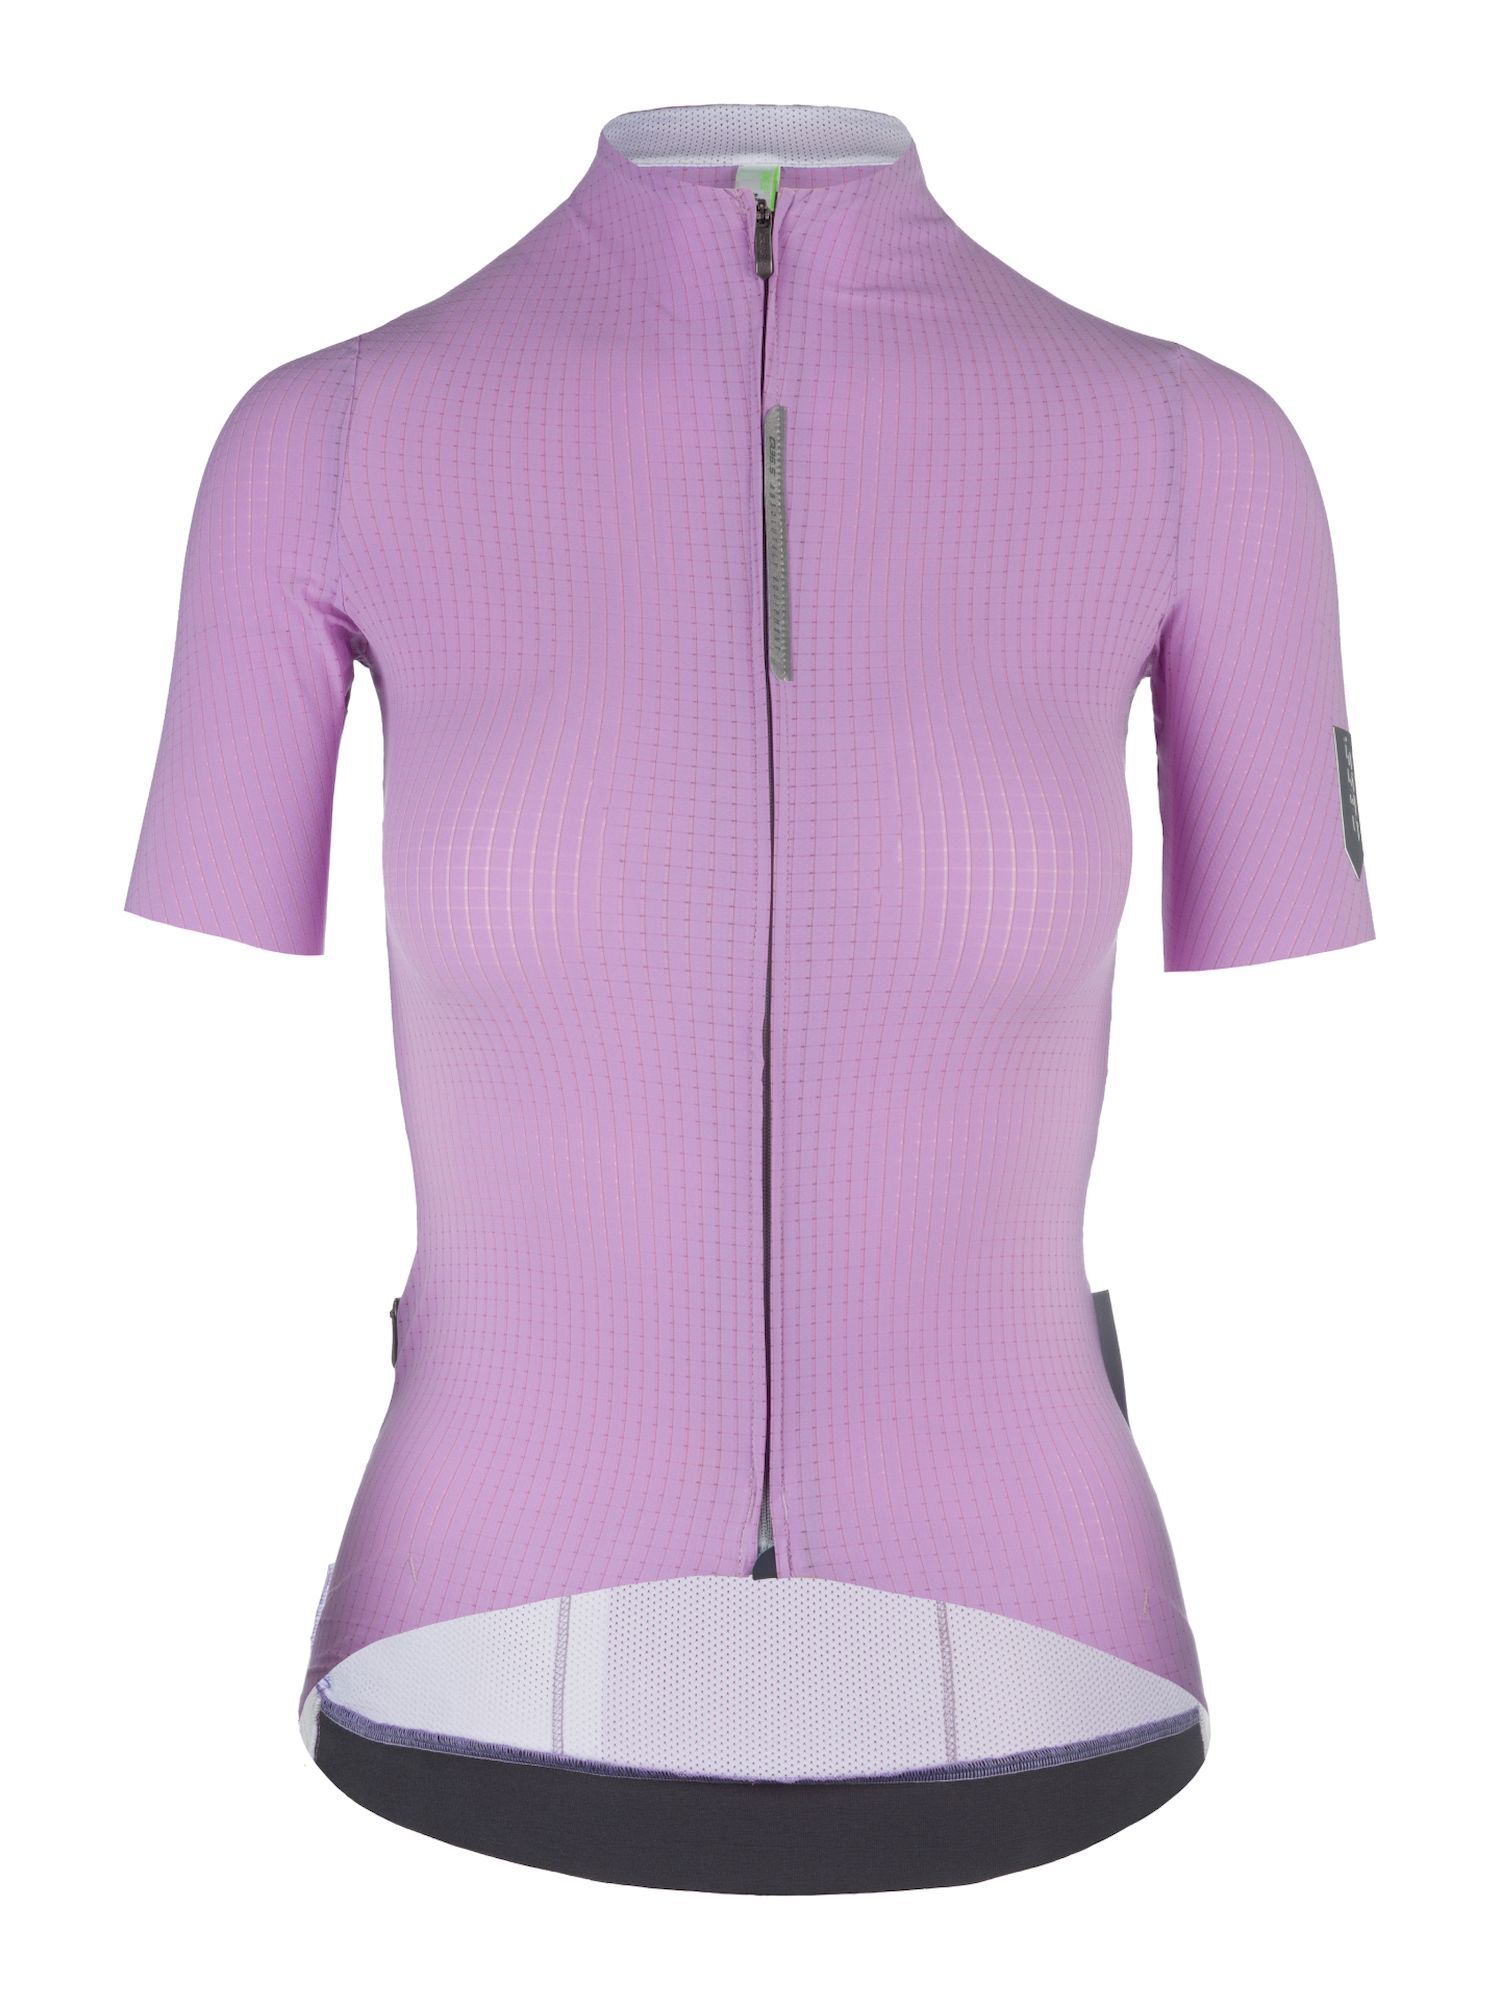 Q36.5 Jersey Short Sleeve Pinstripe Pro - Maglia ciclismo - Donna | Hardloop